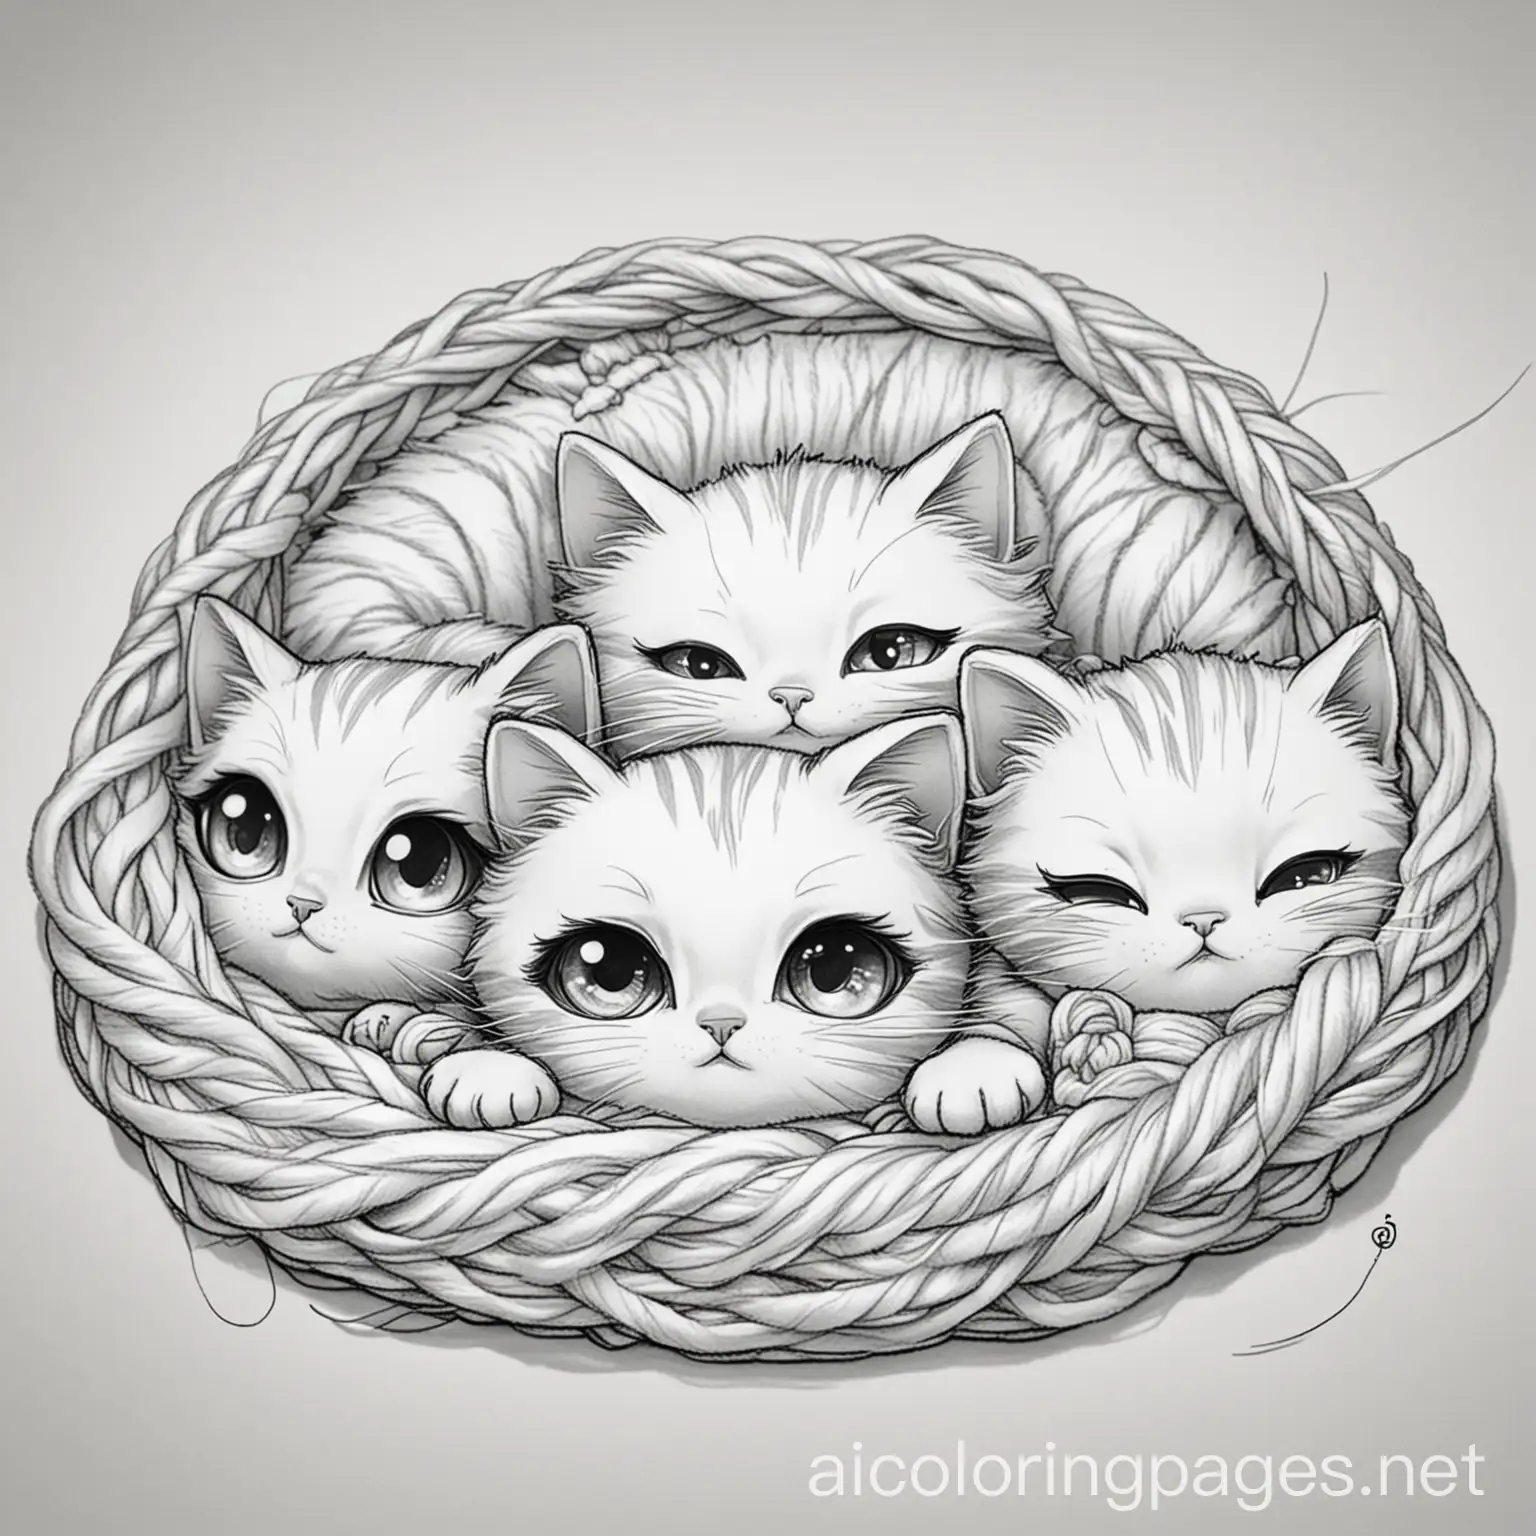 Tiny-Cats-Playing-with-Yarn-Anime-Style-Coloring-Page